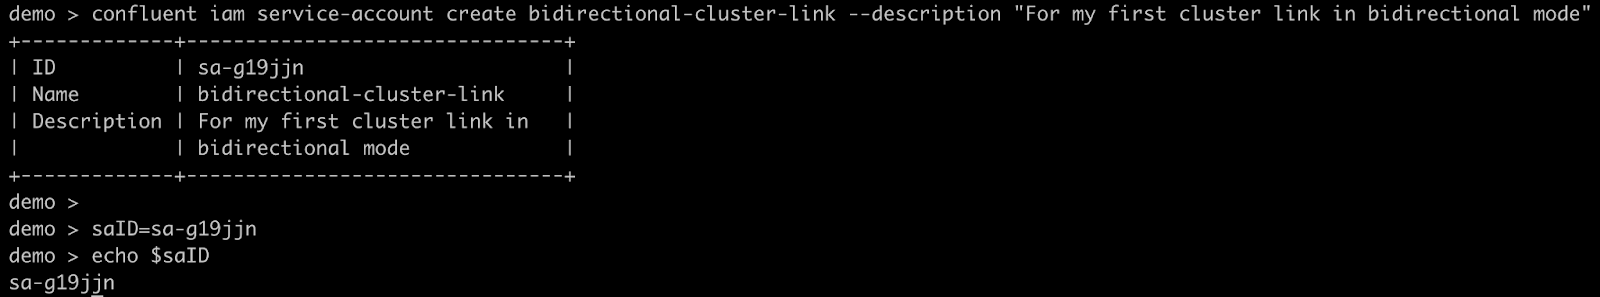 ../../_images/cluster-link-bidirectional-example-commands-save-service-account-ids.png